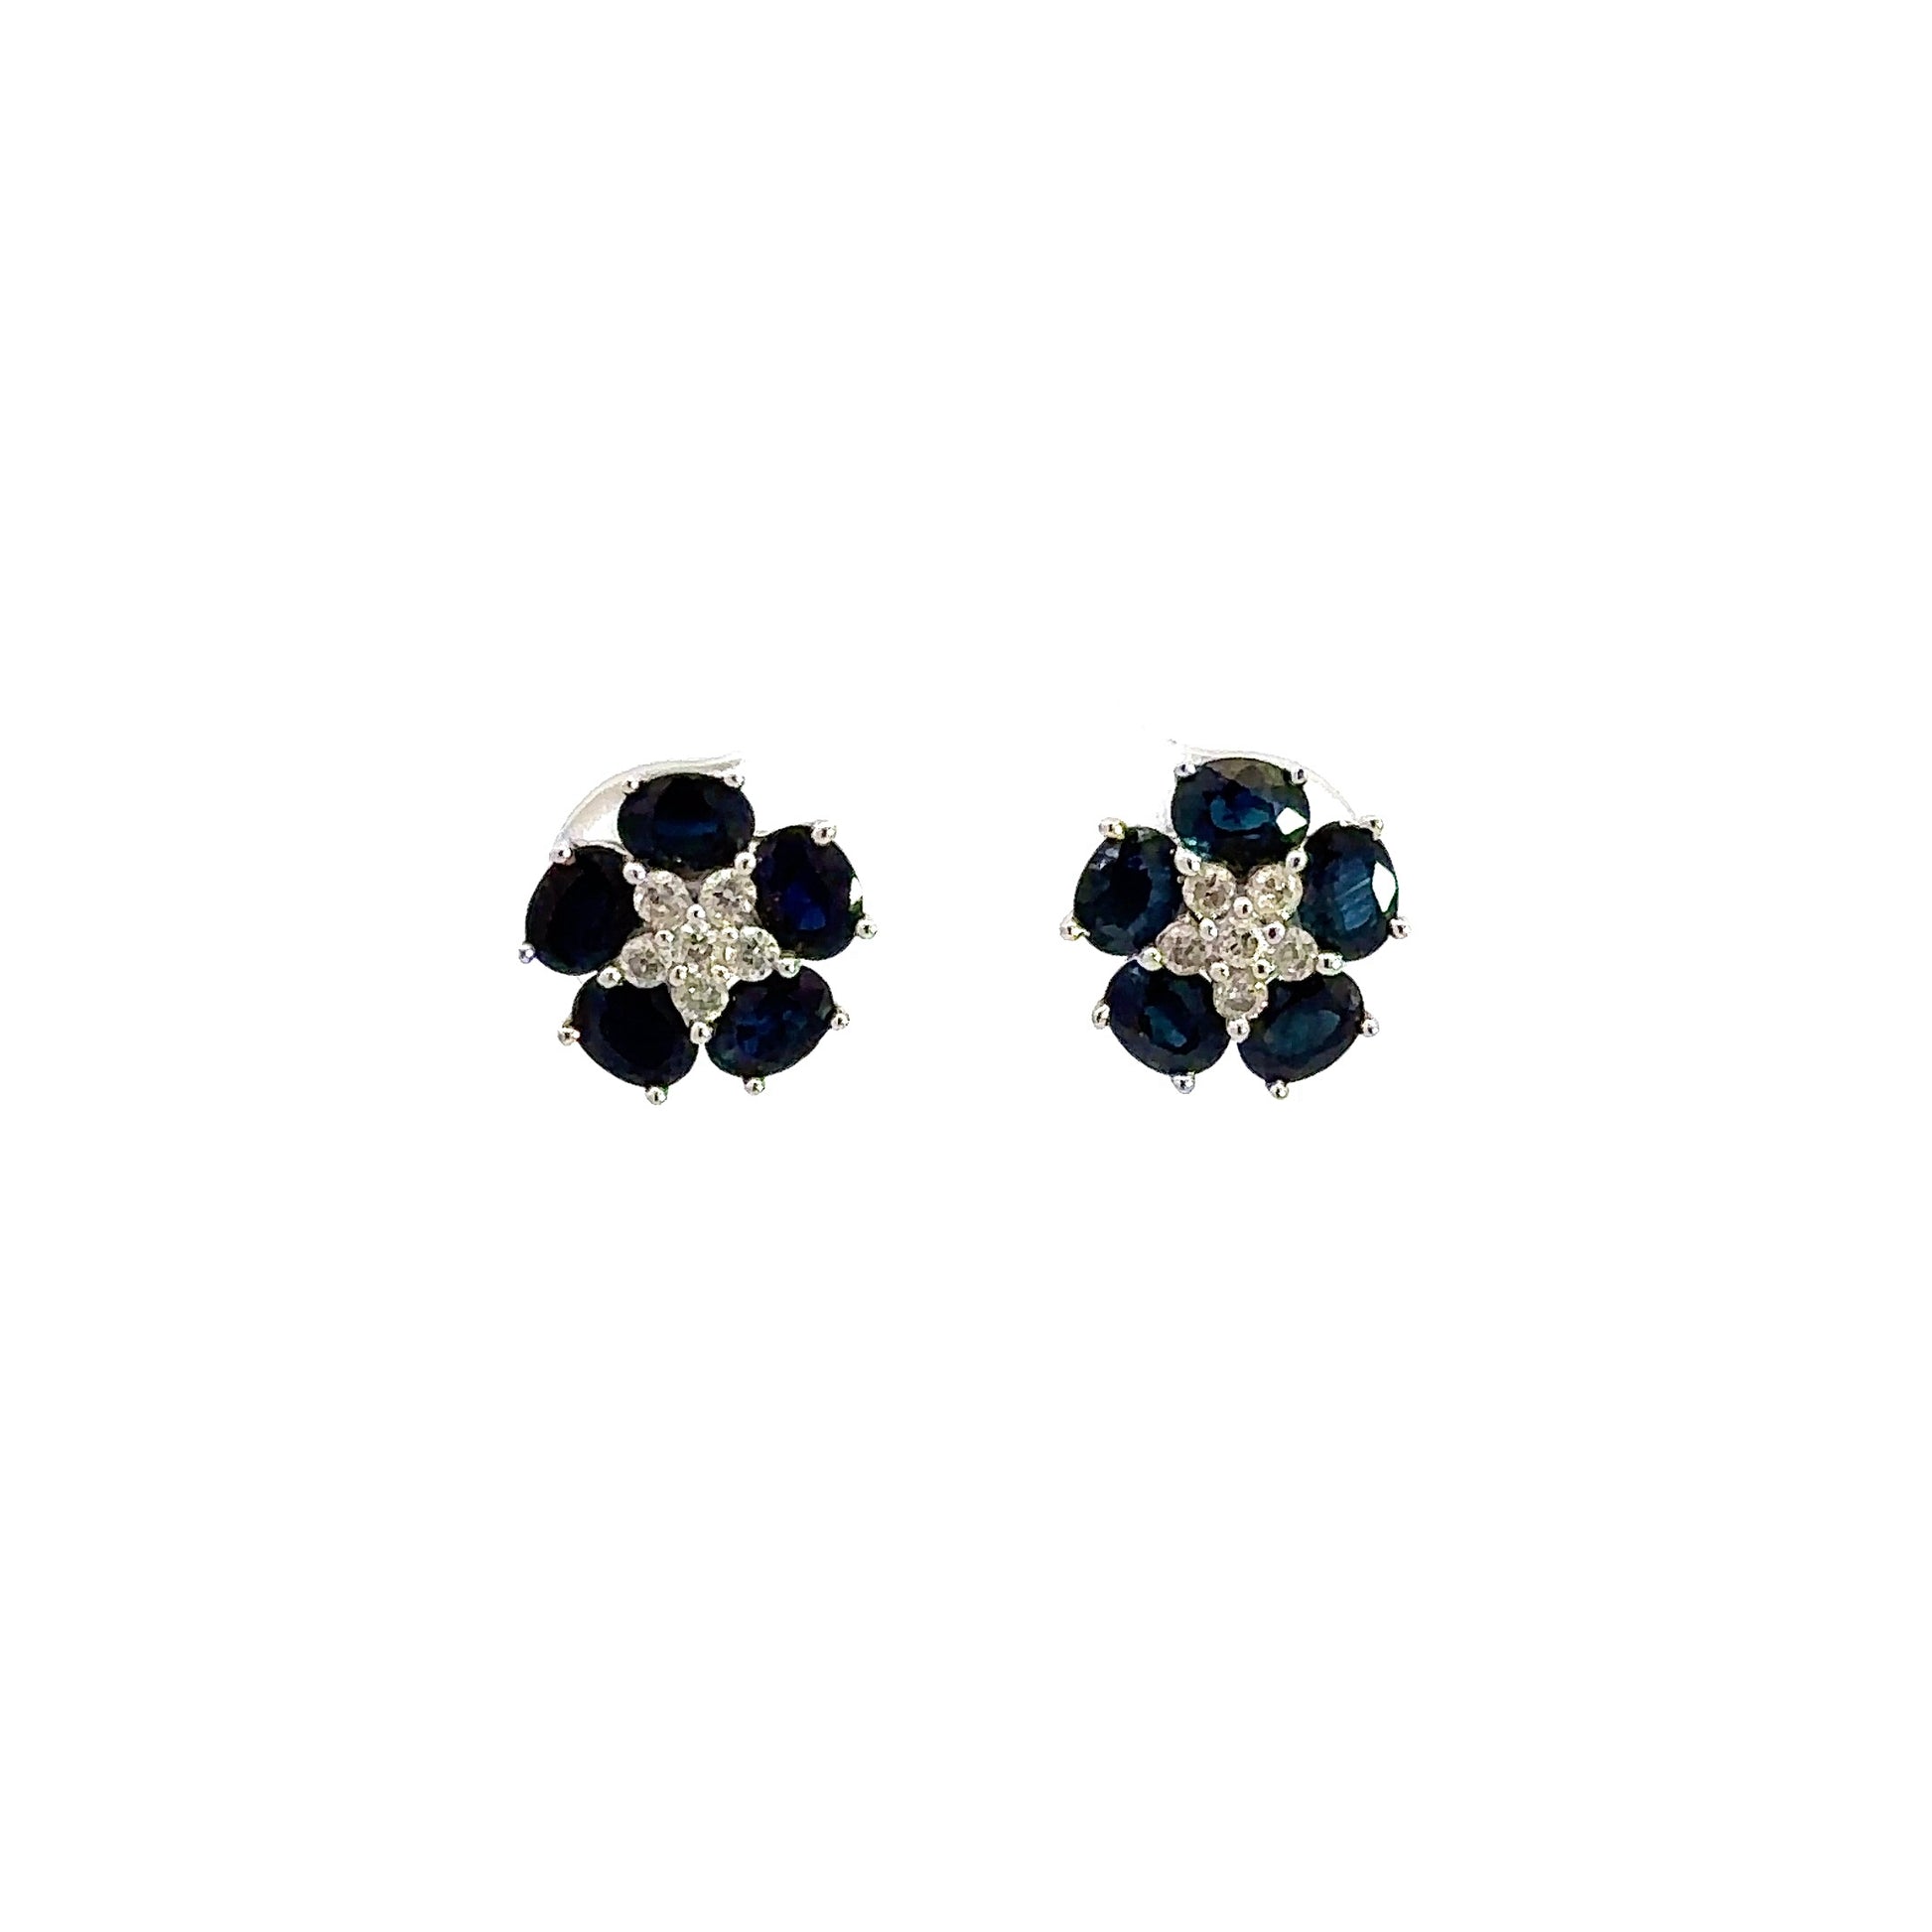 Front of diamond and blue gemstone earrings with 6 small round brilliant diamonds in the center and 5 oval shaped dark blue gemstones around them.